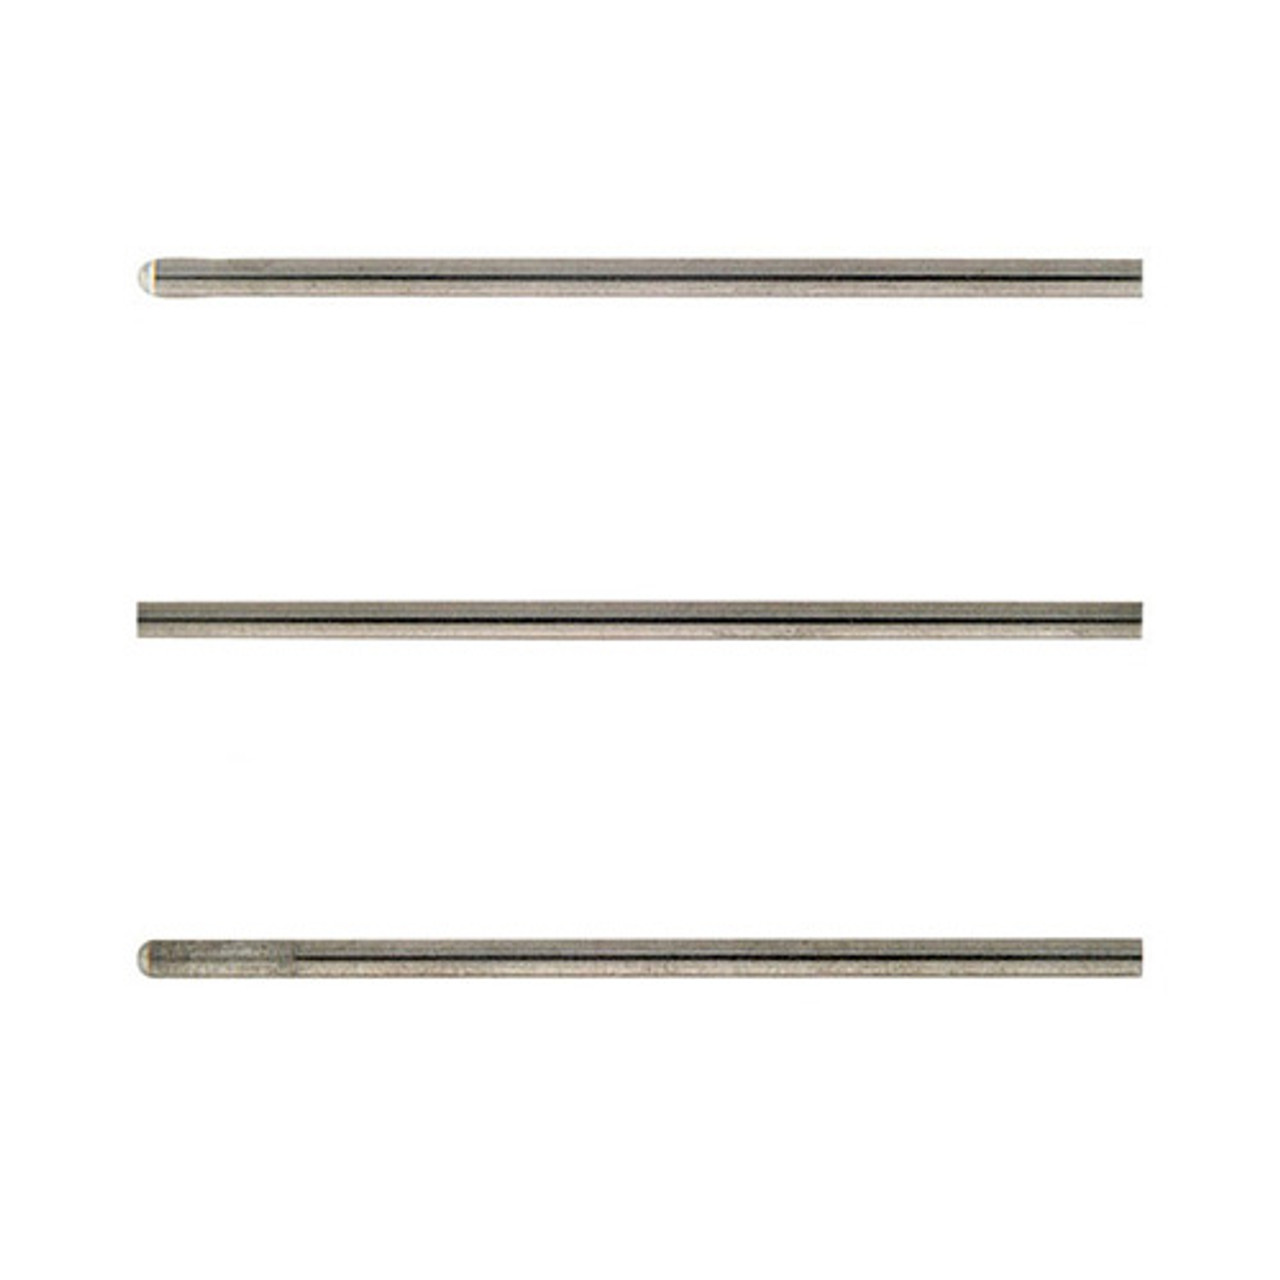 Weldmax Nonmagnetic Electrodes & Holders - Round Electrode, 50 x 3mm